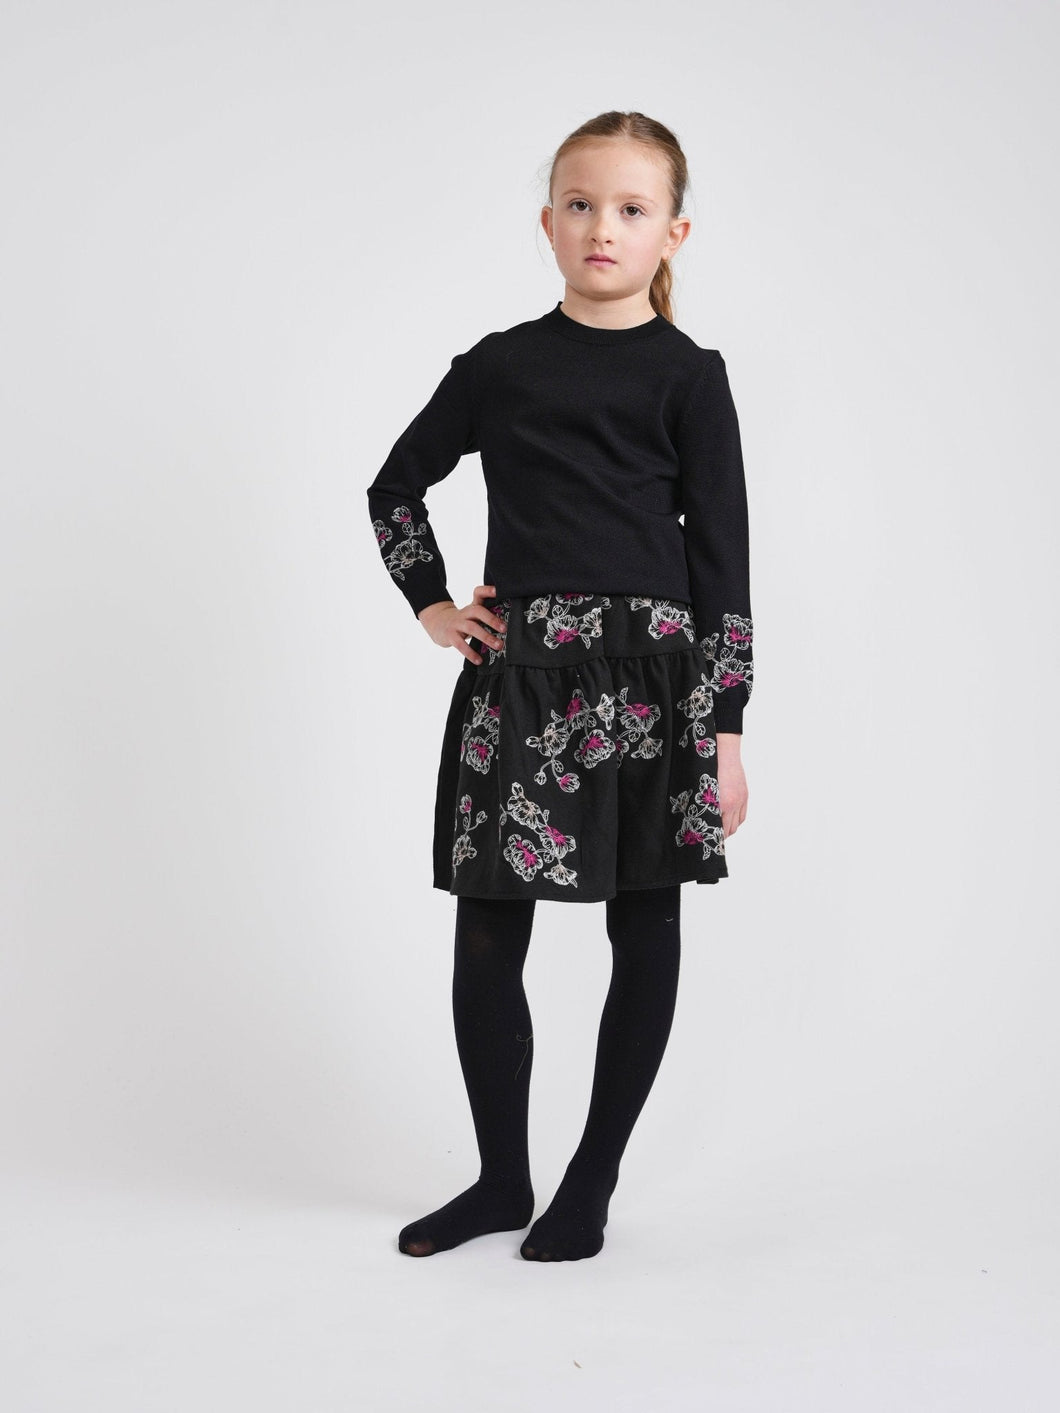 LU SKIRT WITH EMBROIDERED FLOWERS - Skirts